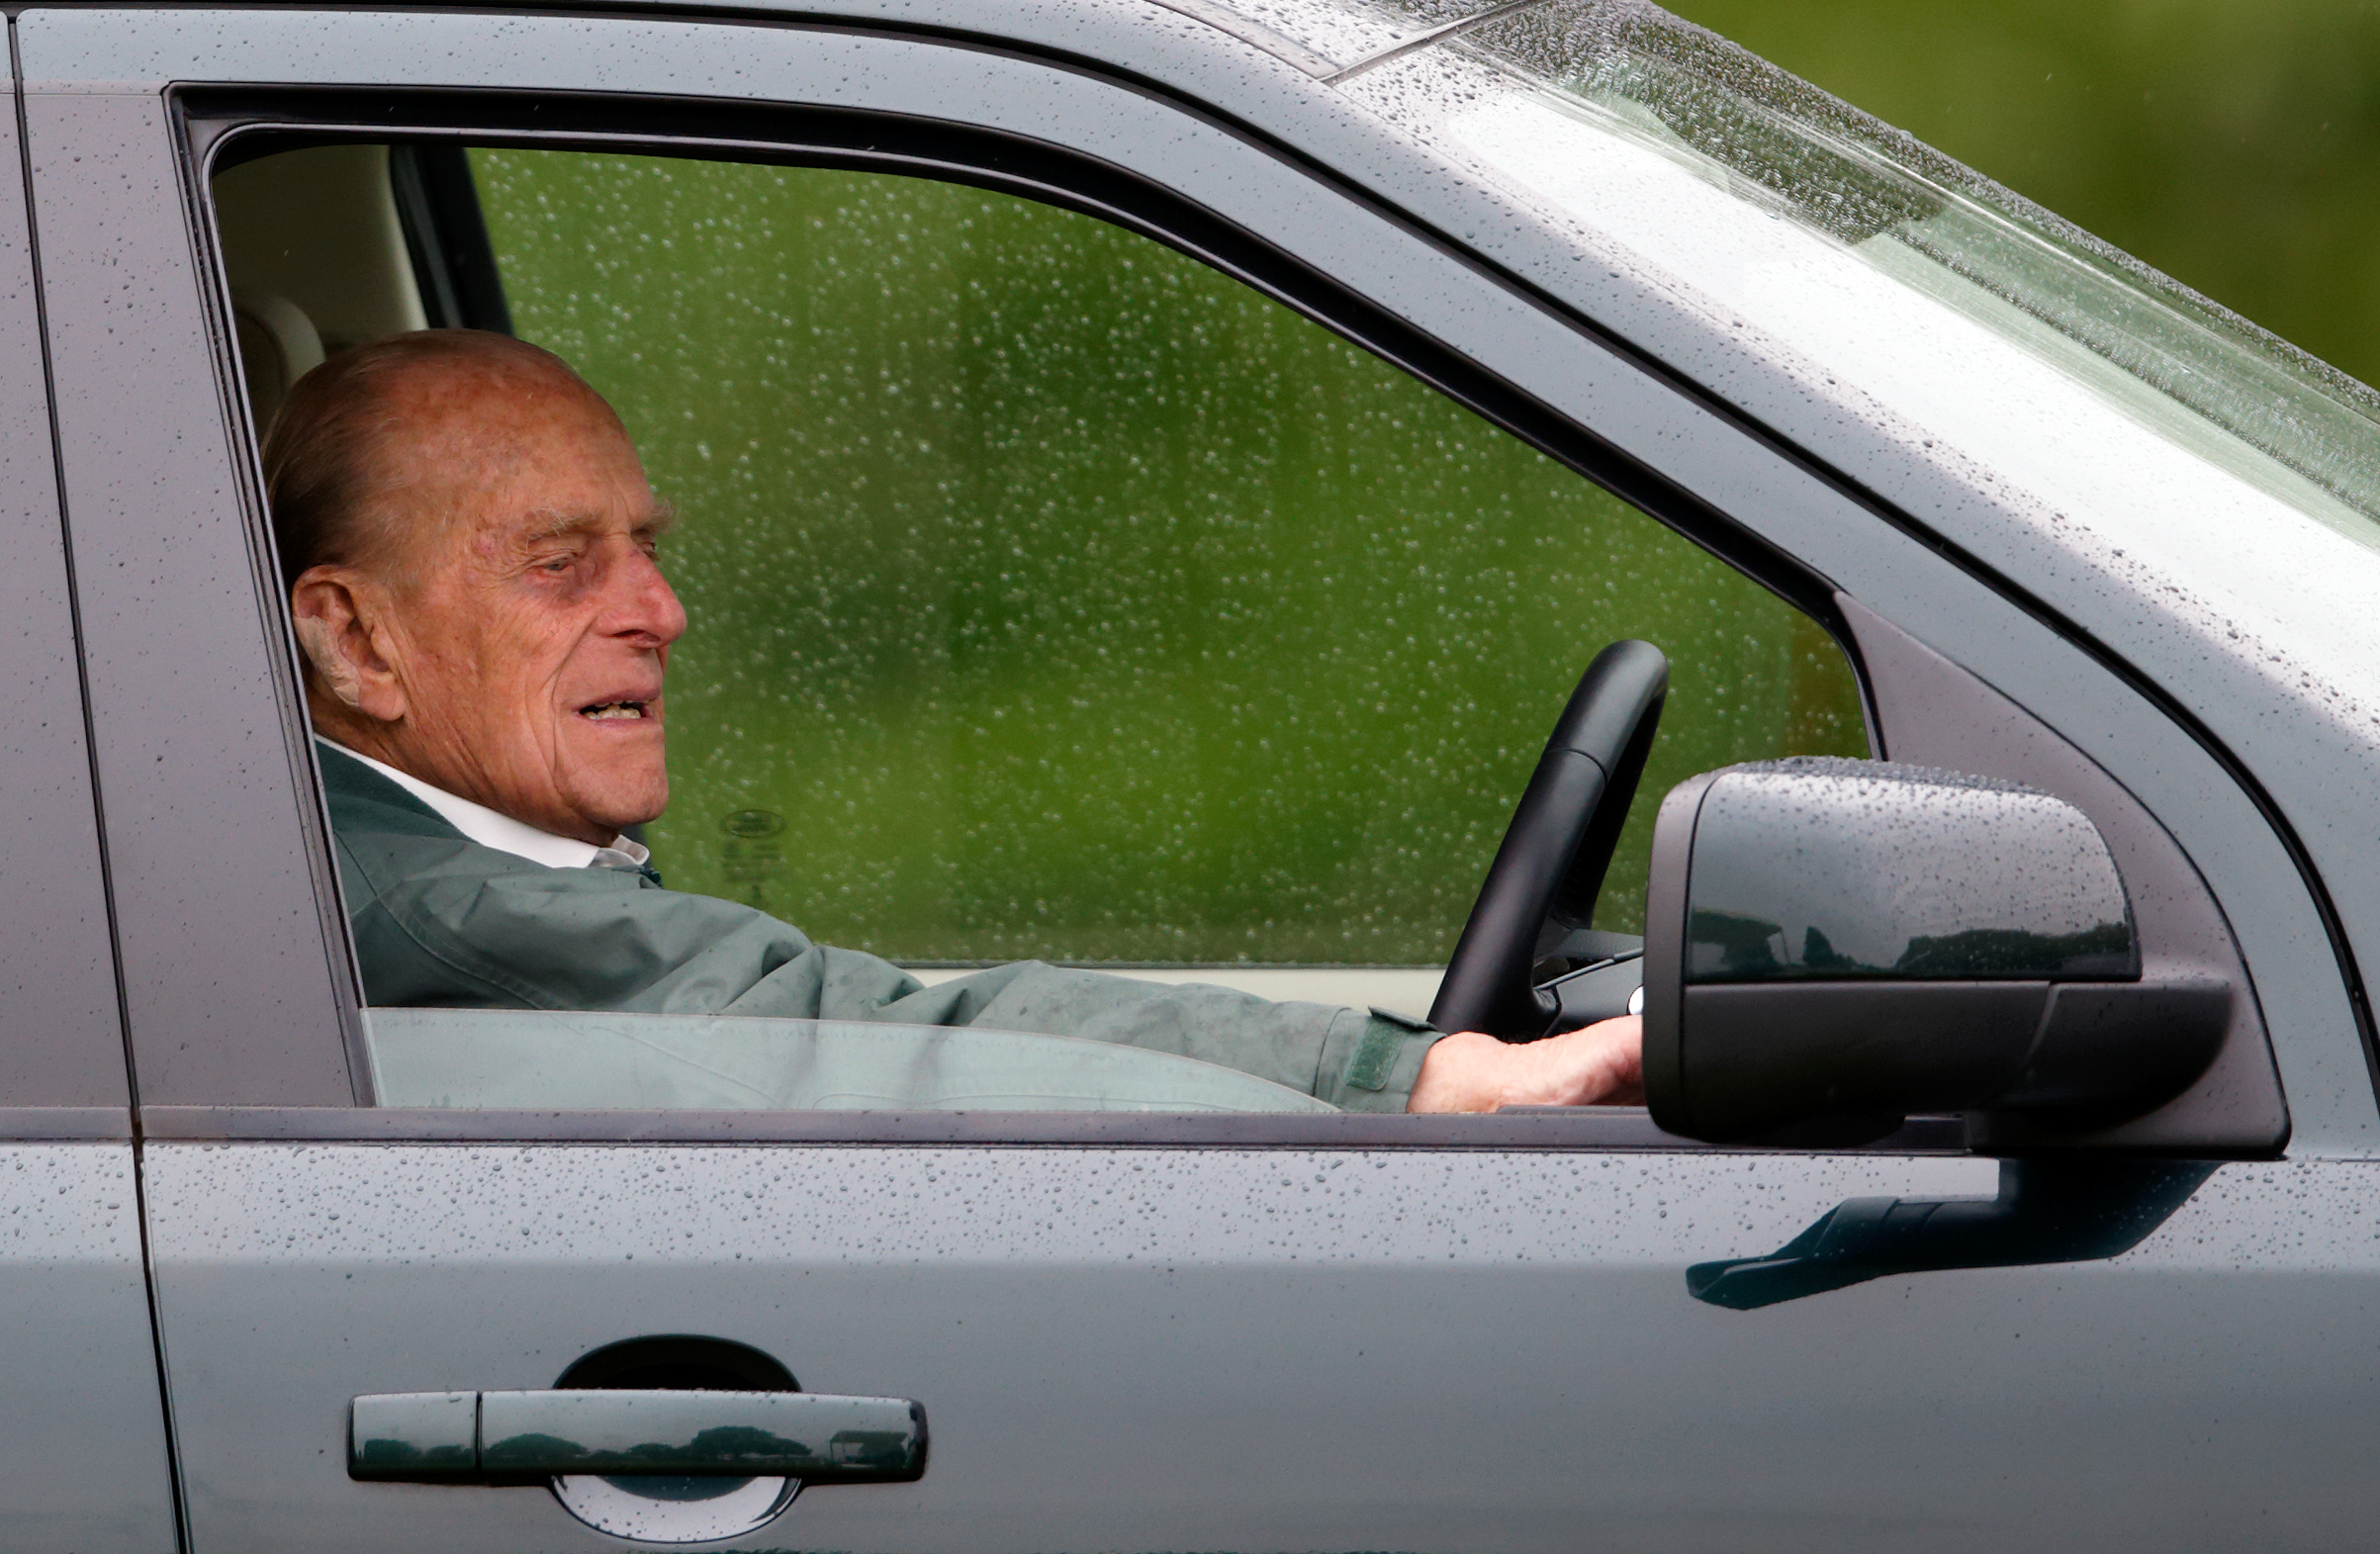 No state but only ceremonial funeral for Prince Philip on 